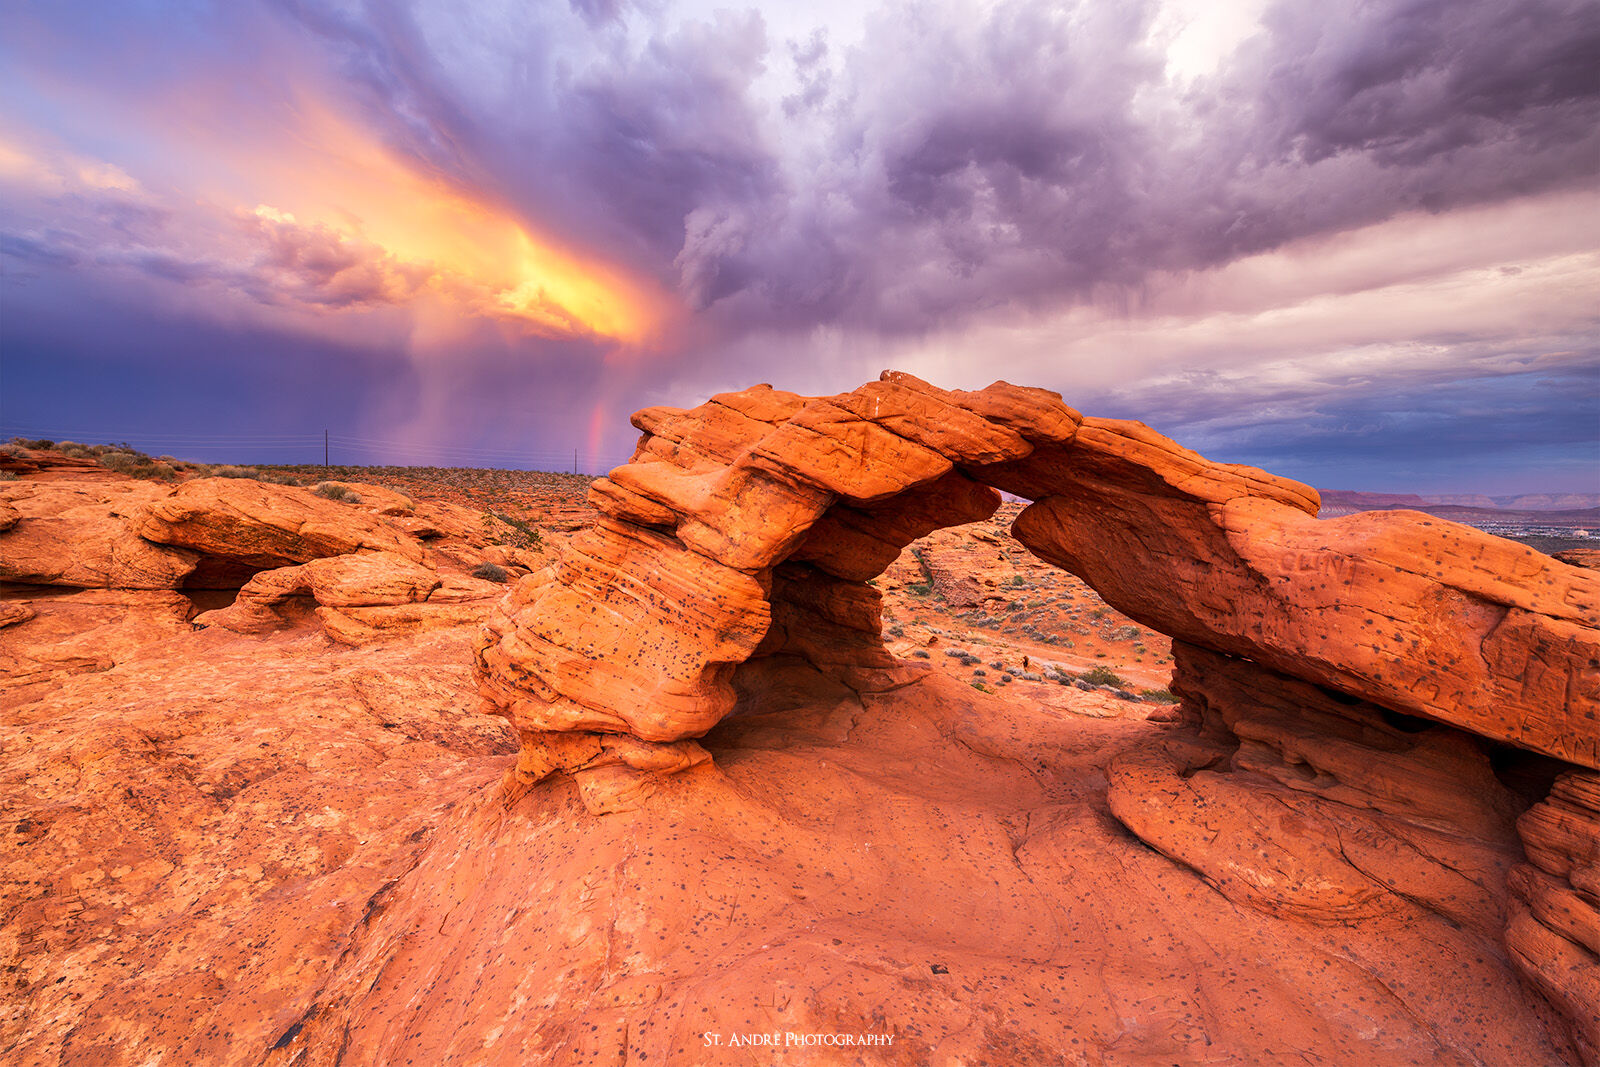 Eagle Arch highlights a desert landscape while a thunderstorm rages above the landscape and a rainbow can be faintly seen to the side of the arch. 